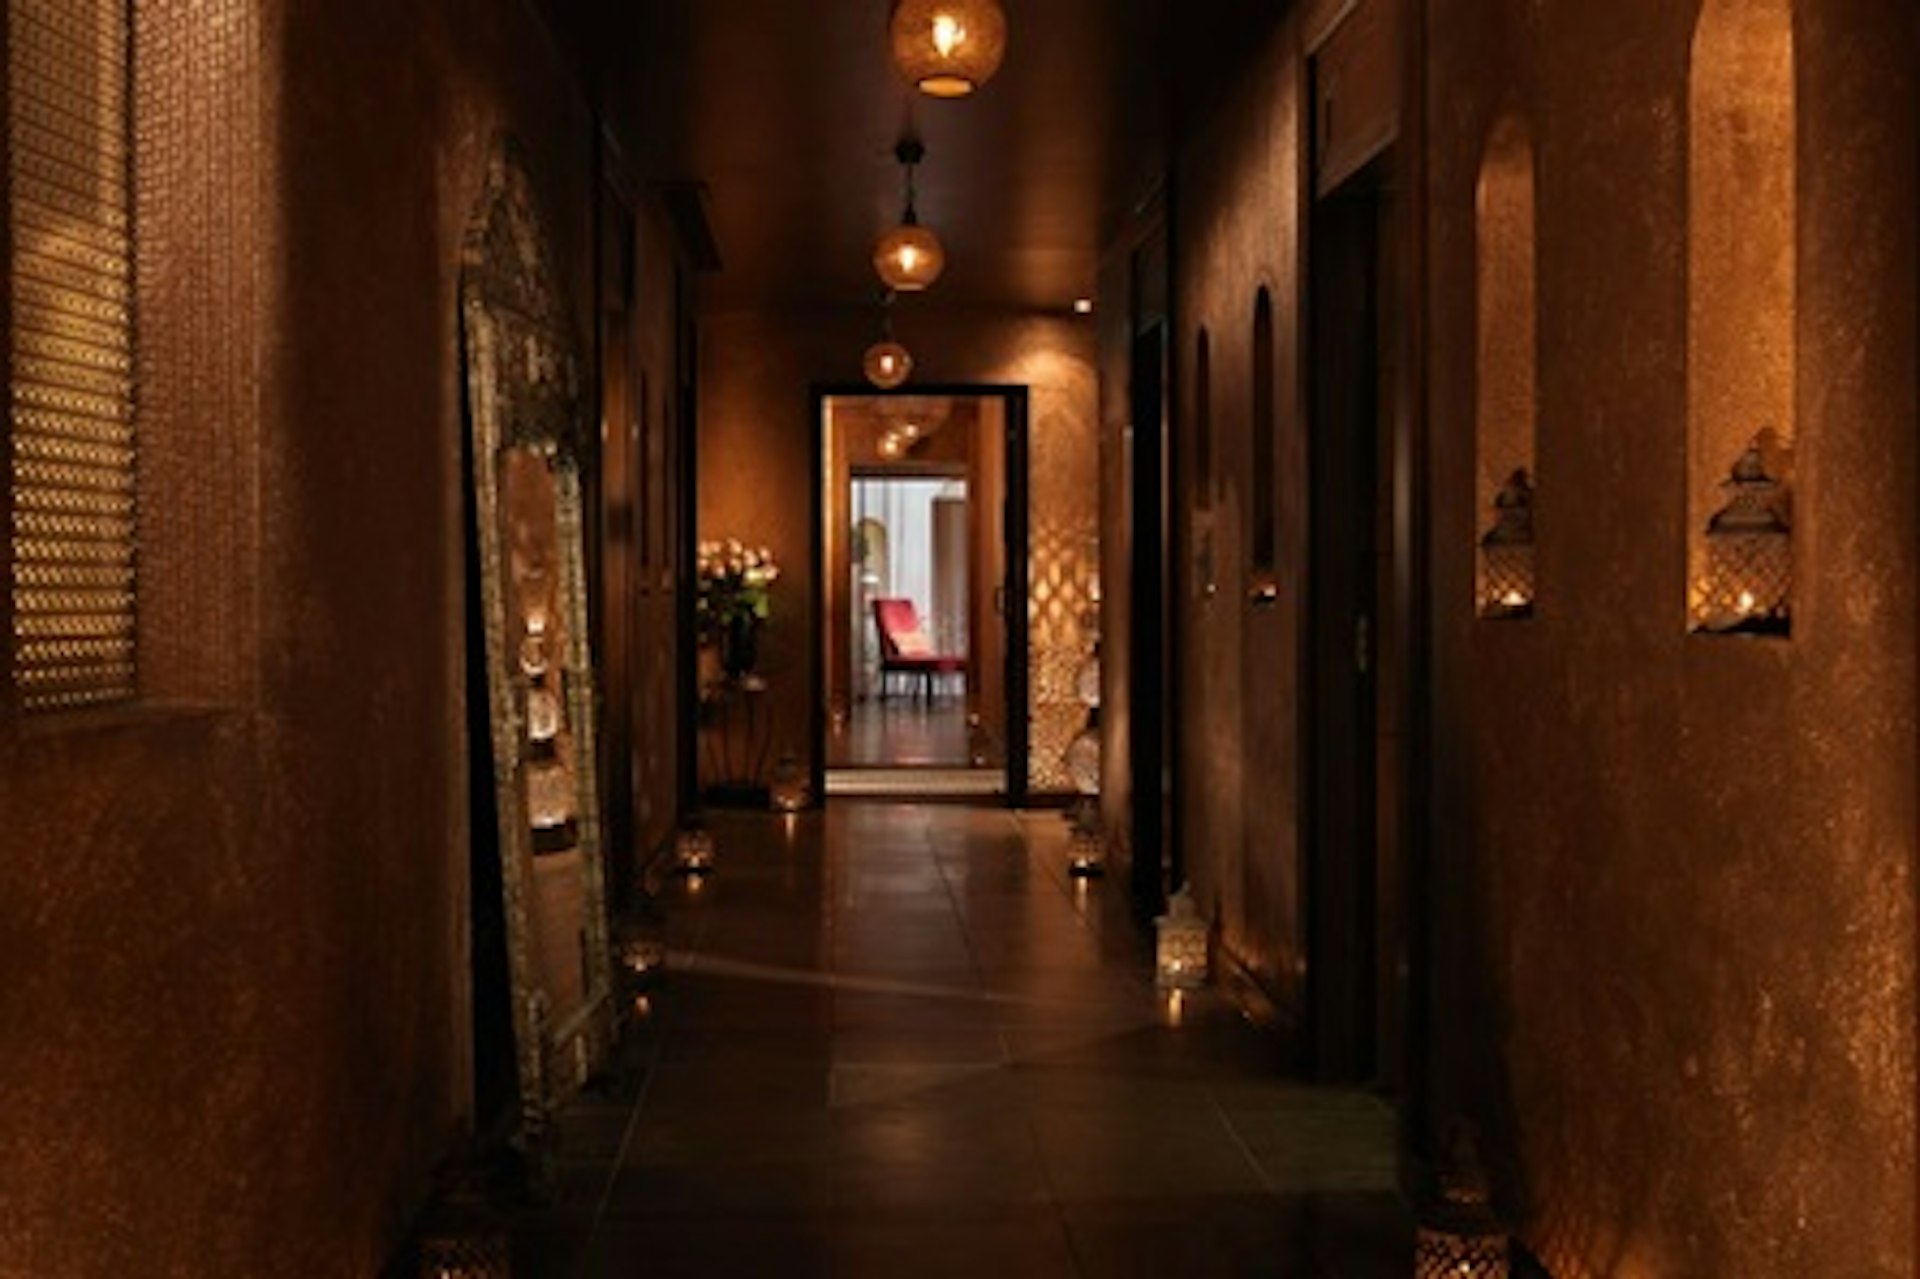 Moroccan Spa Day with Rhassoul and Massage for Two at The Spa in Dolphin Square 1